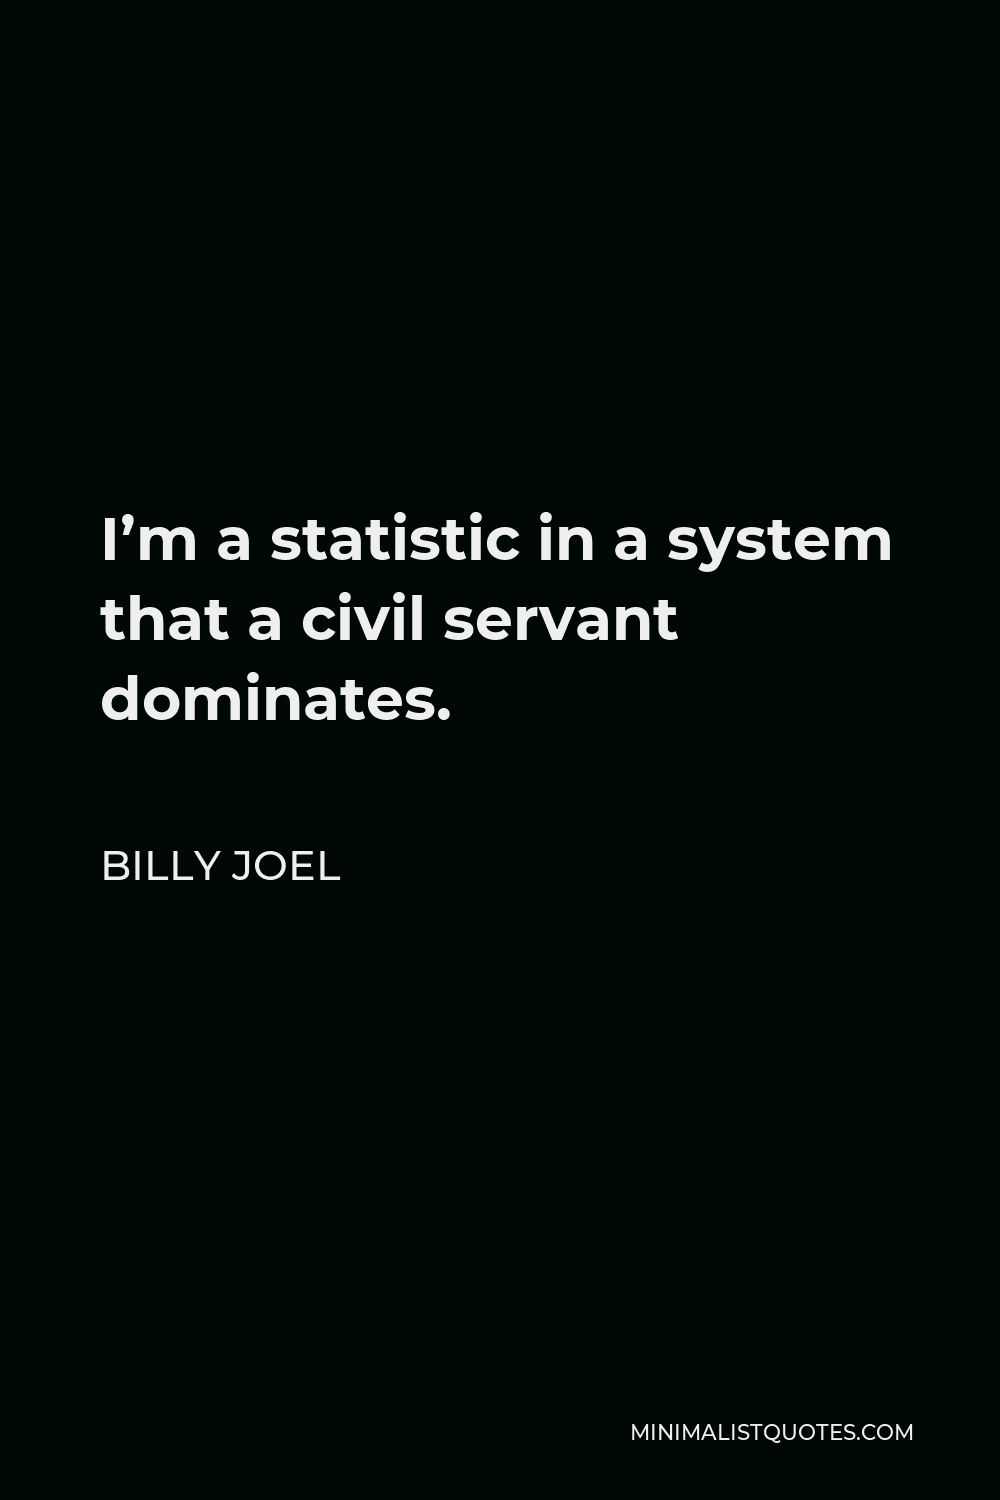 Billy Joel Quote - I’m a statistic in a system that a civil servant dominates.